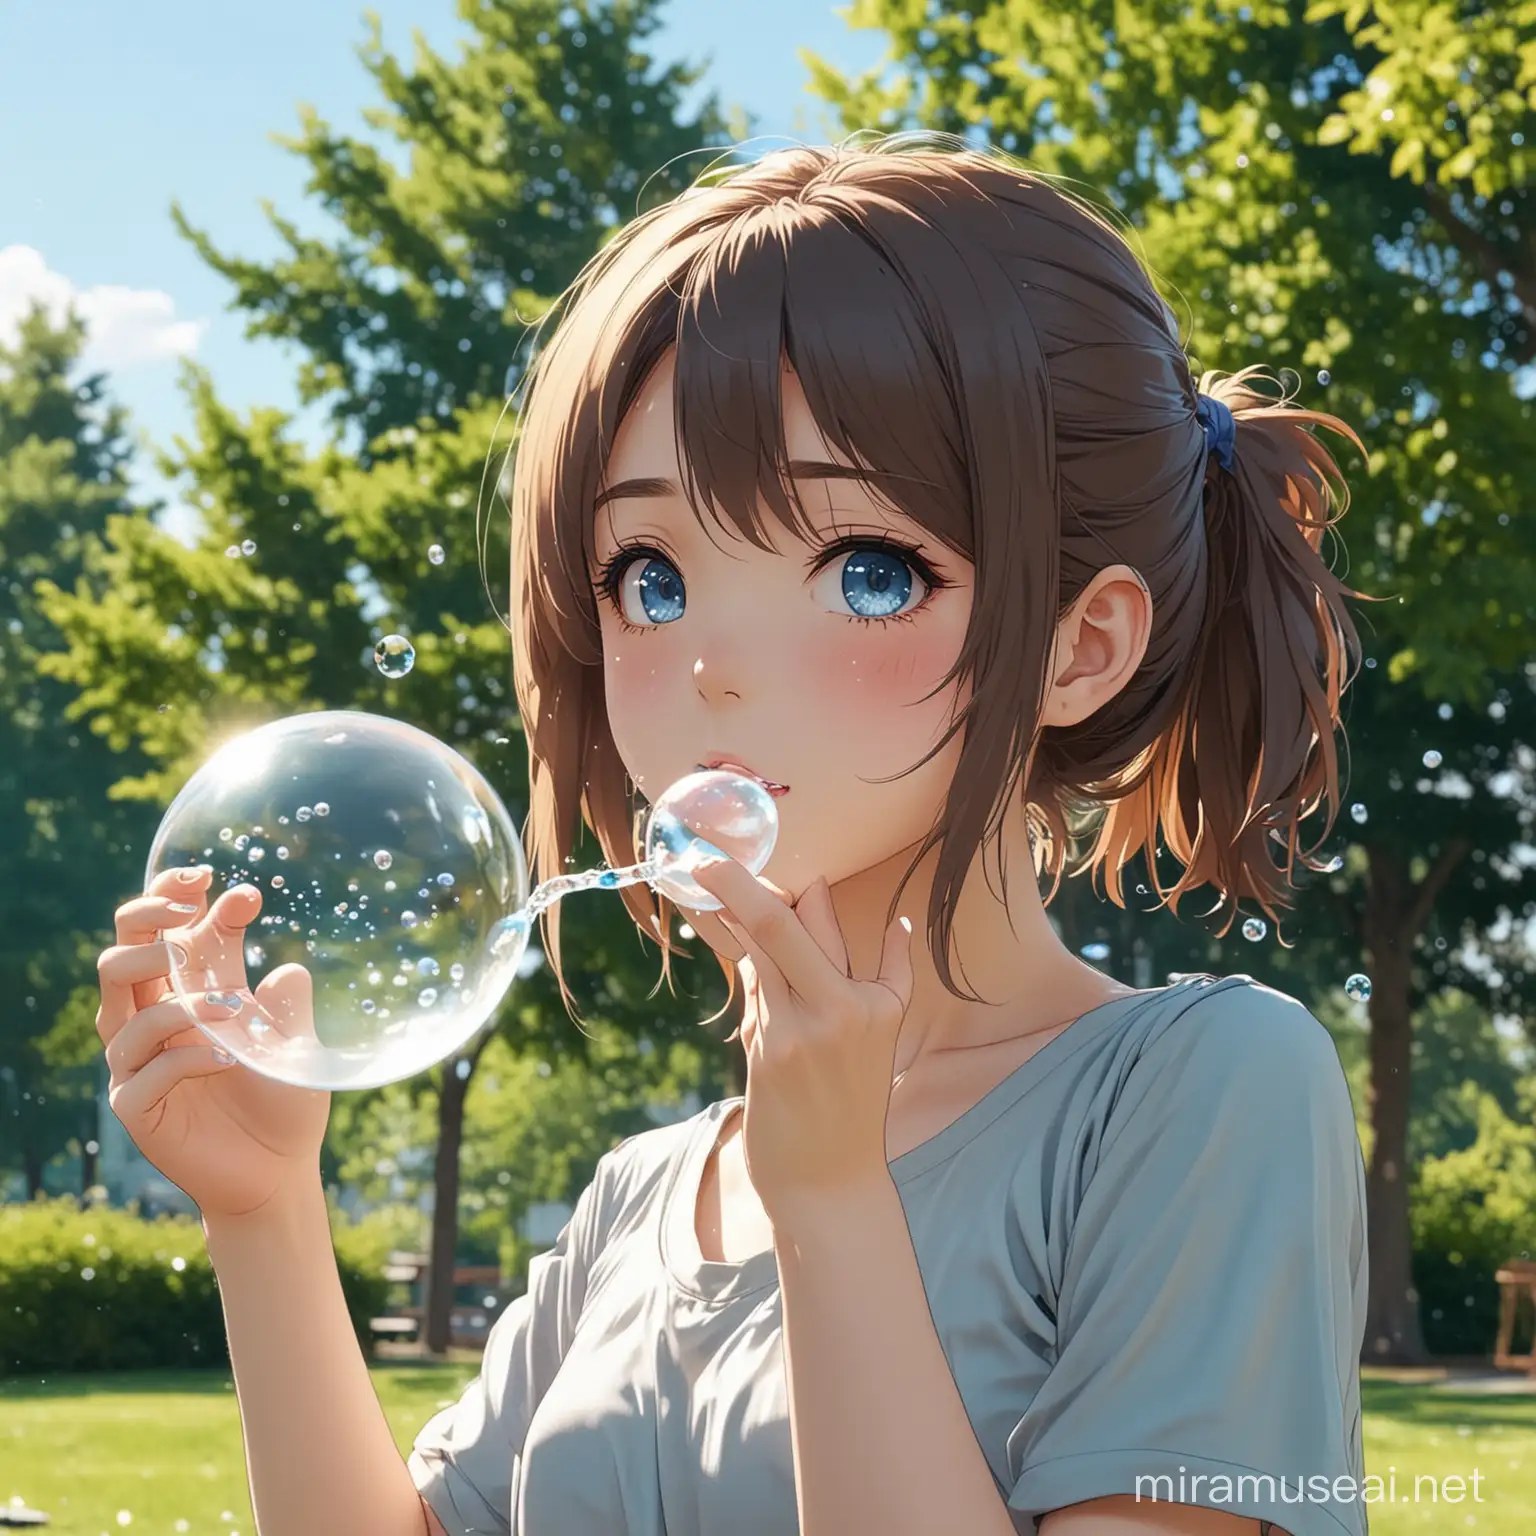 anime girl blows water bubble in park